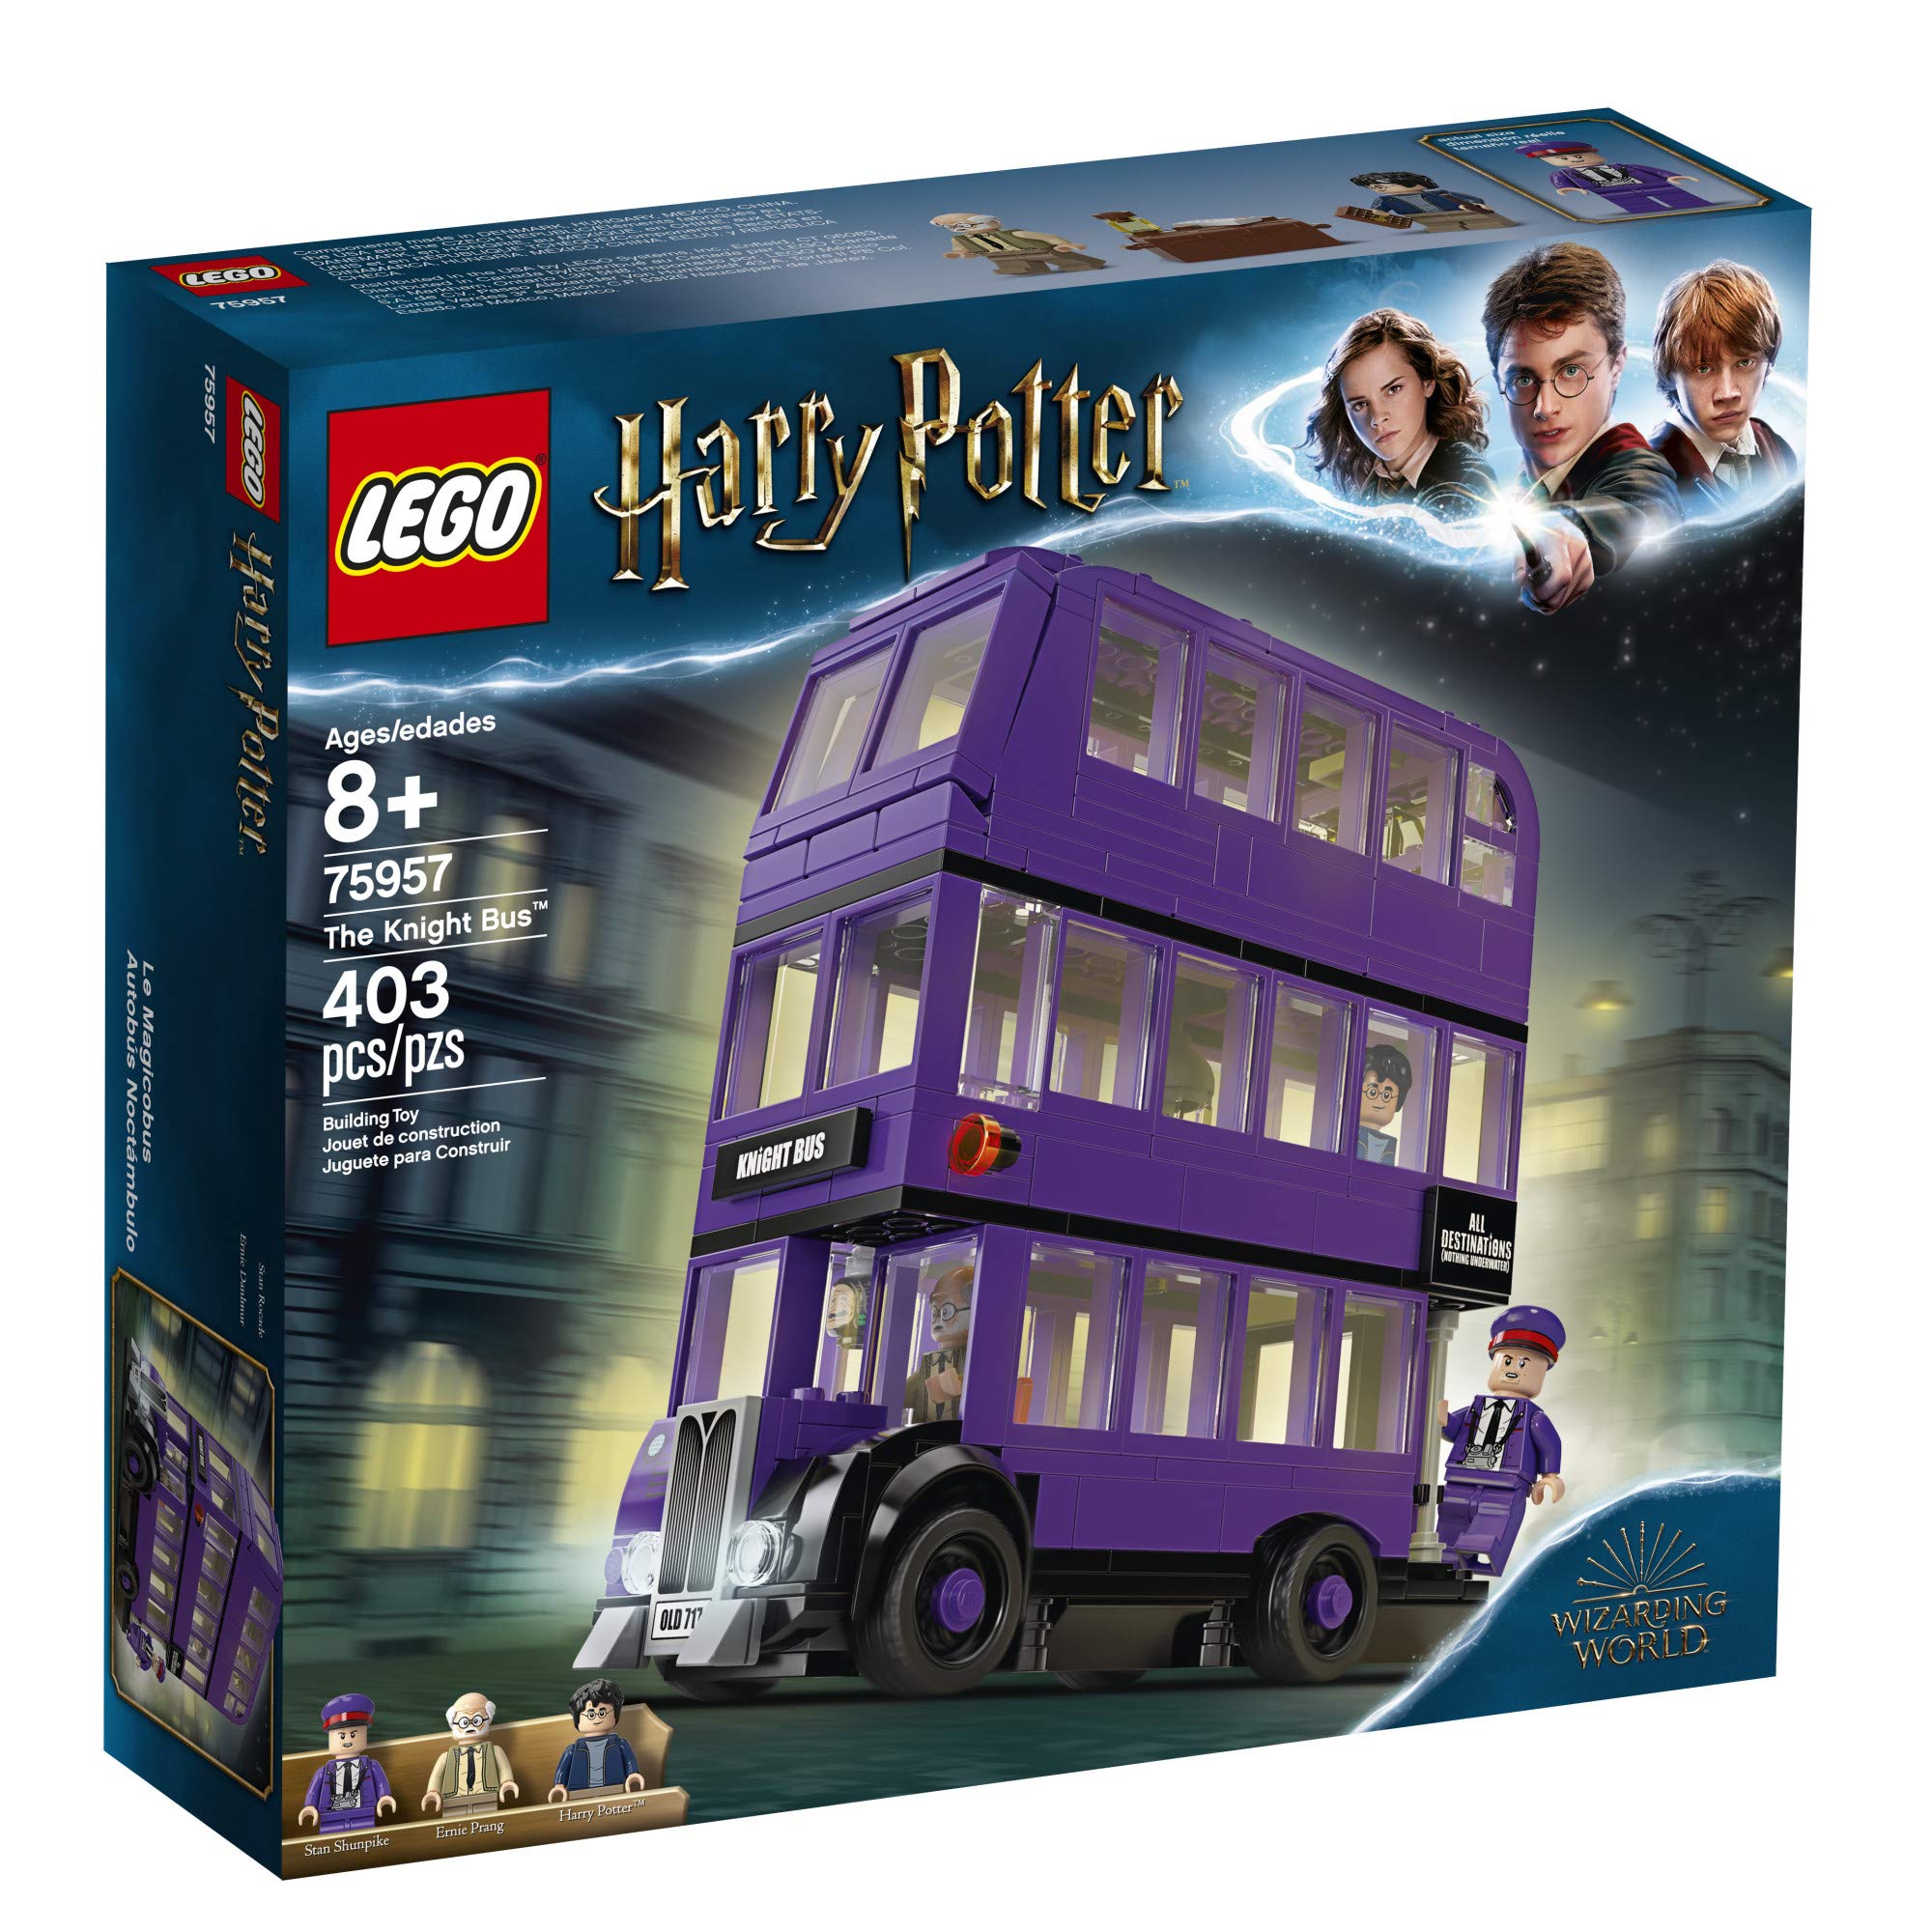 LEGO Harry Potter and The Prisoner of Azkaban Knight Bus 75957 Building Kit (403 Pieces) (Like New, Open Box)